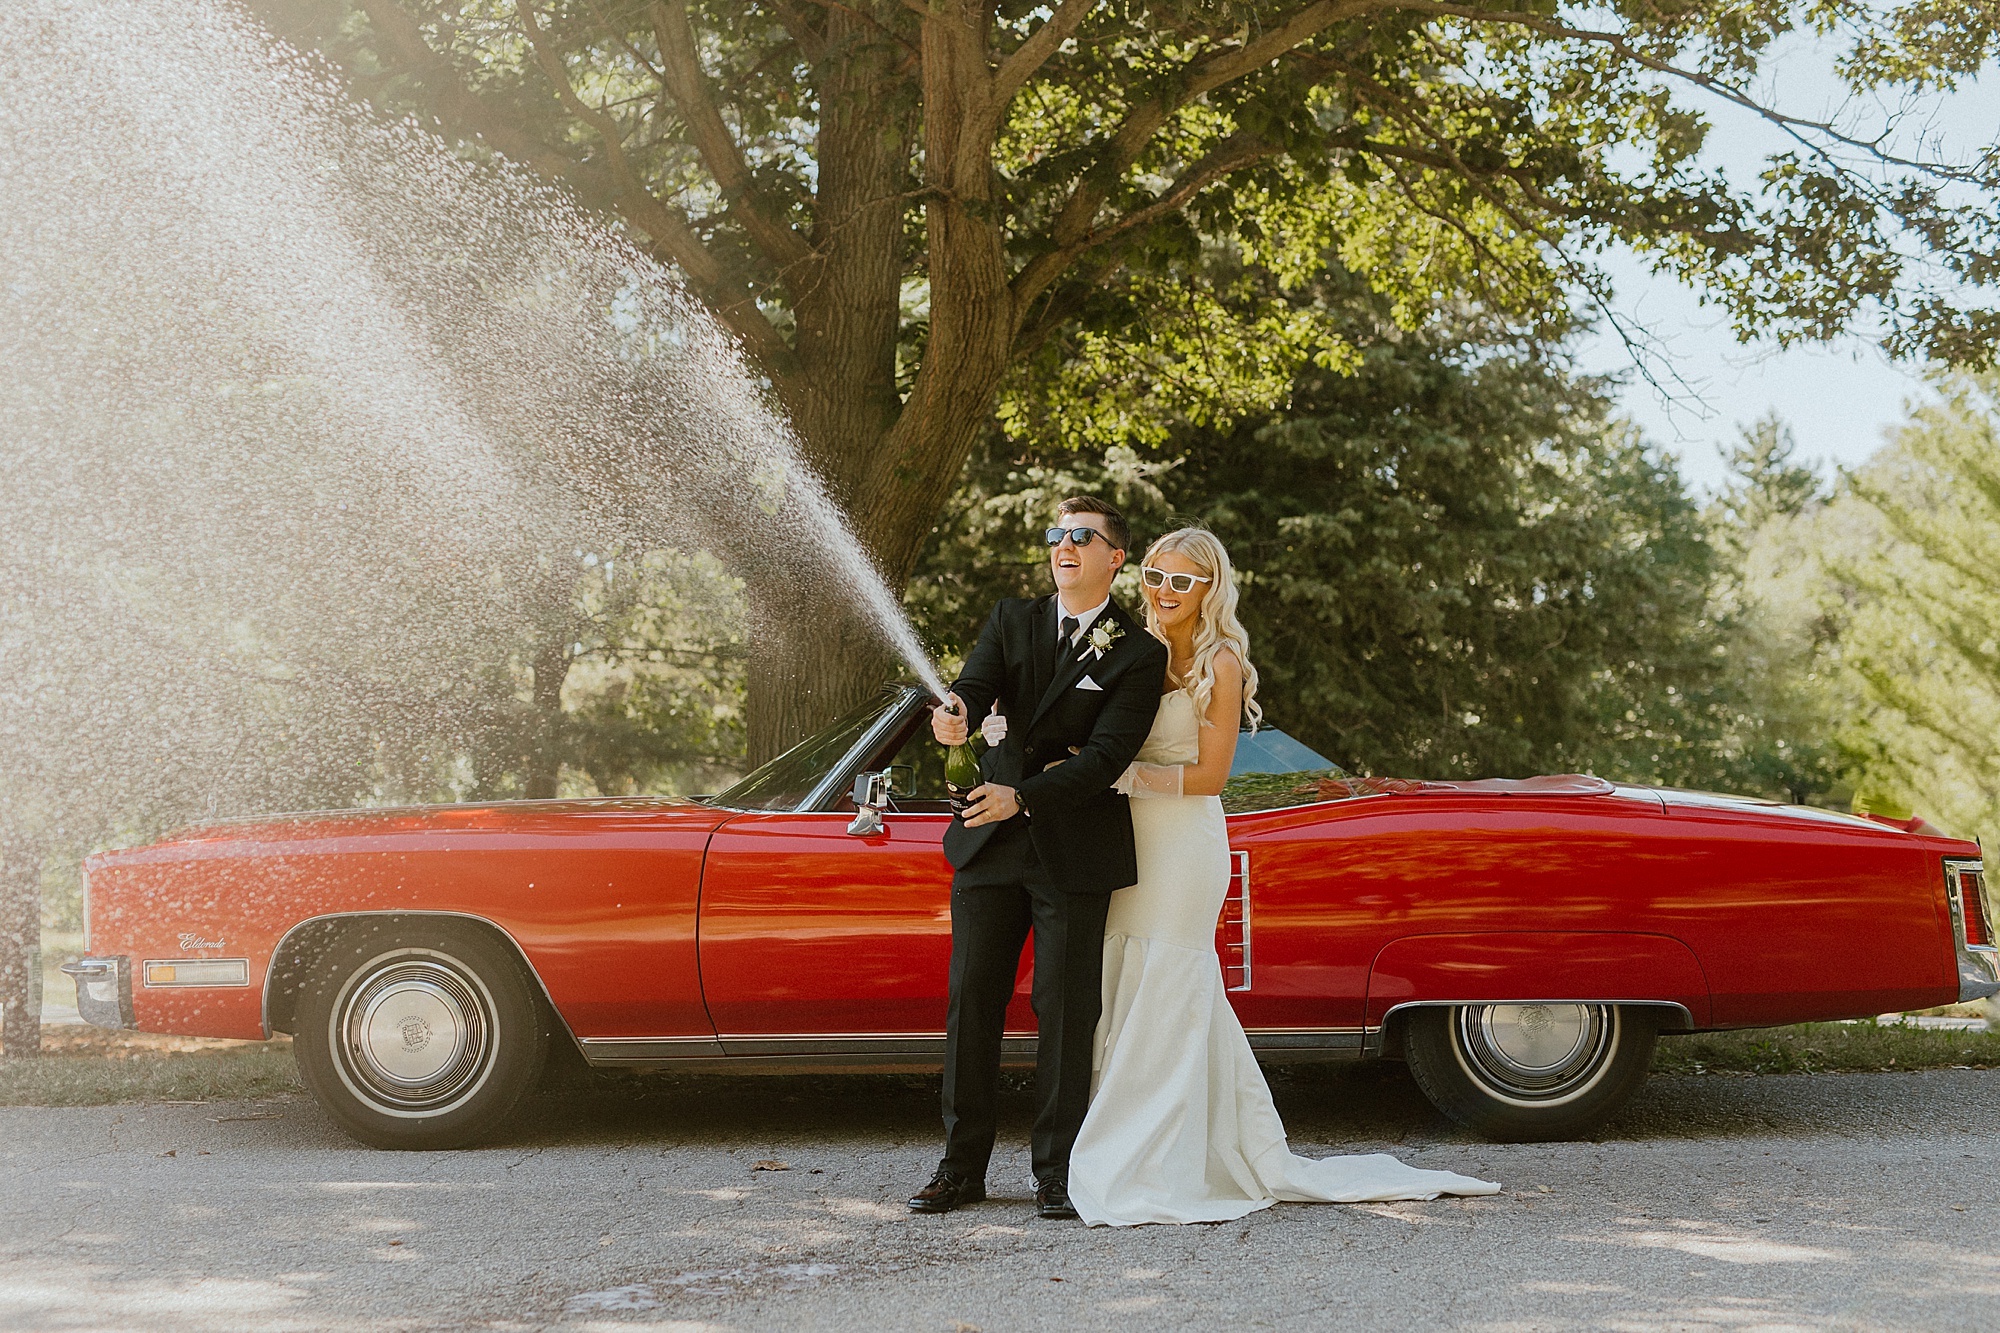 bride and groom enjoy the perfect wedding gift by red classic car champagne